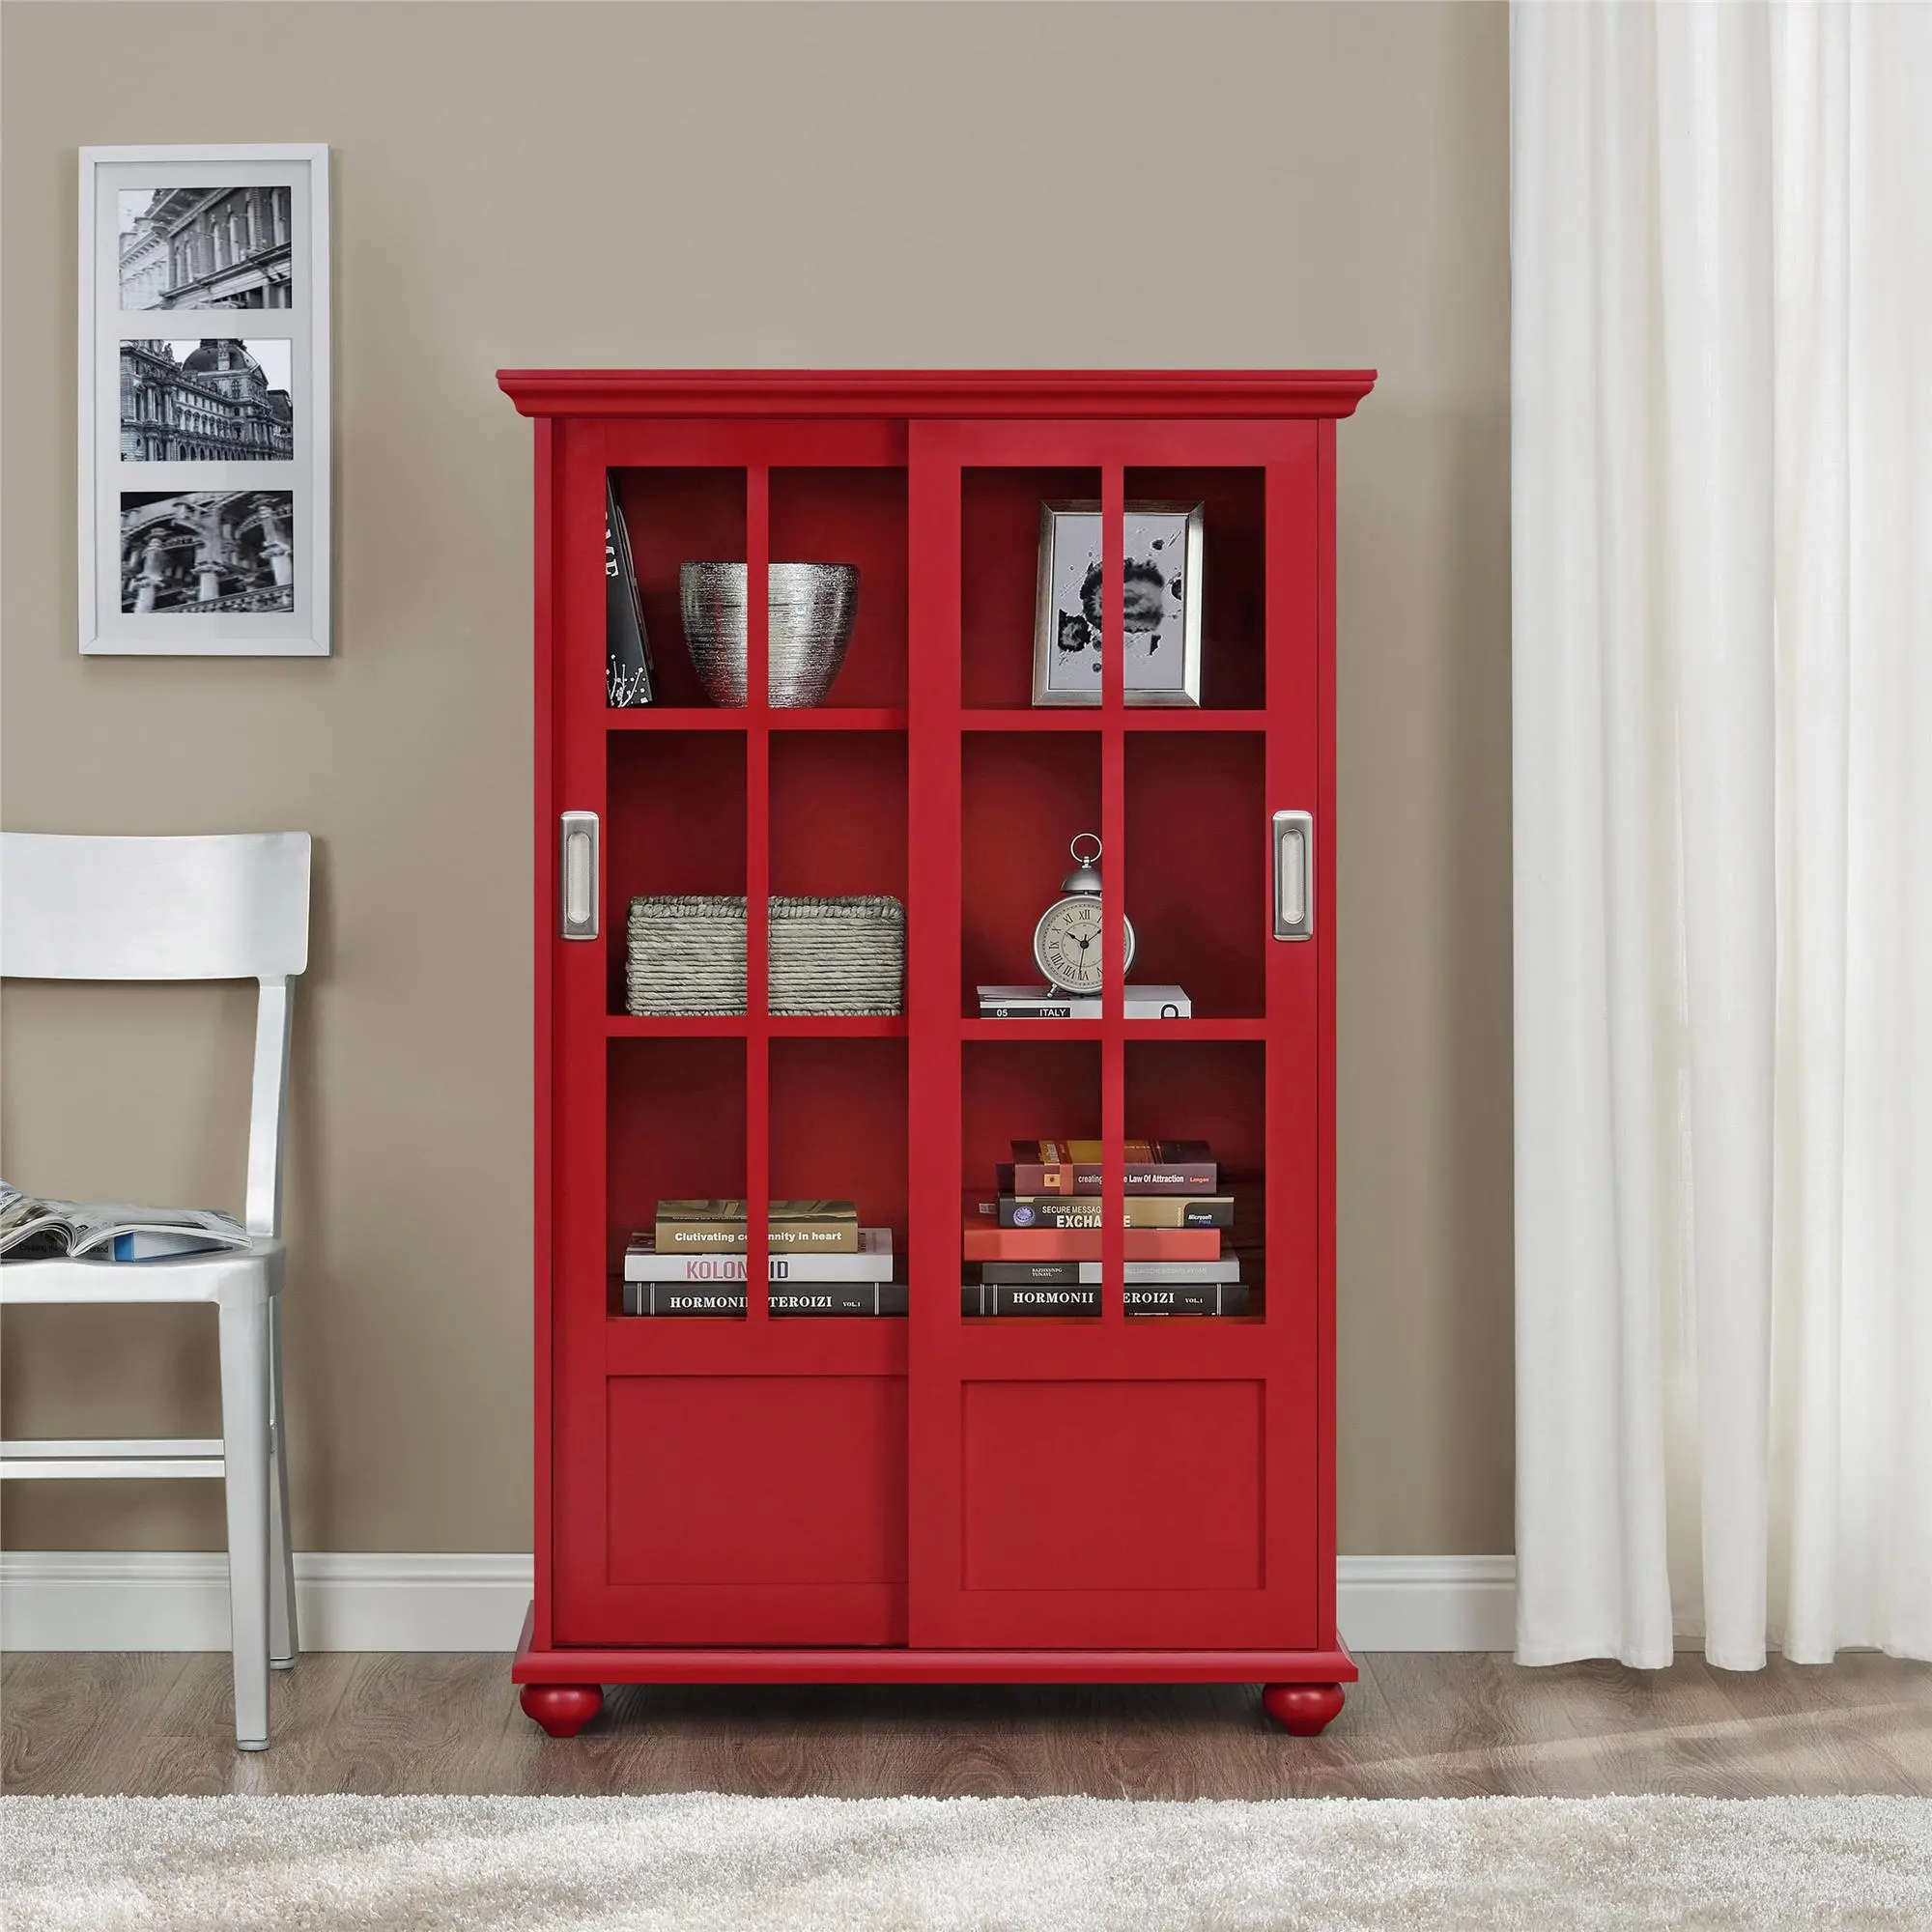 Aaron Lane Red Bookcase with Sliding Glass Doors